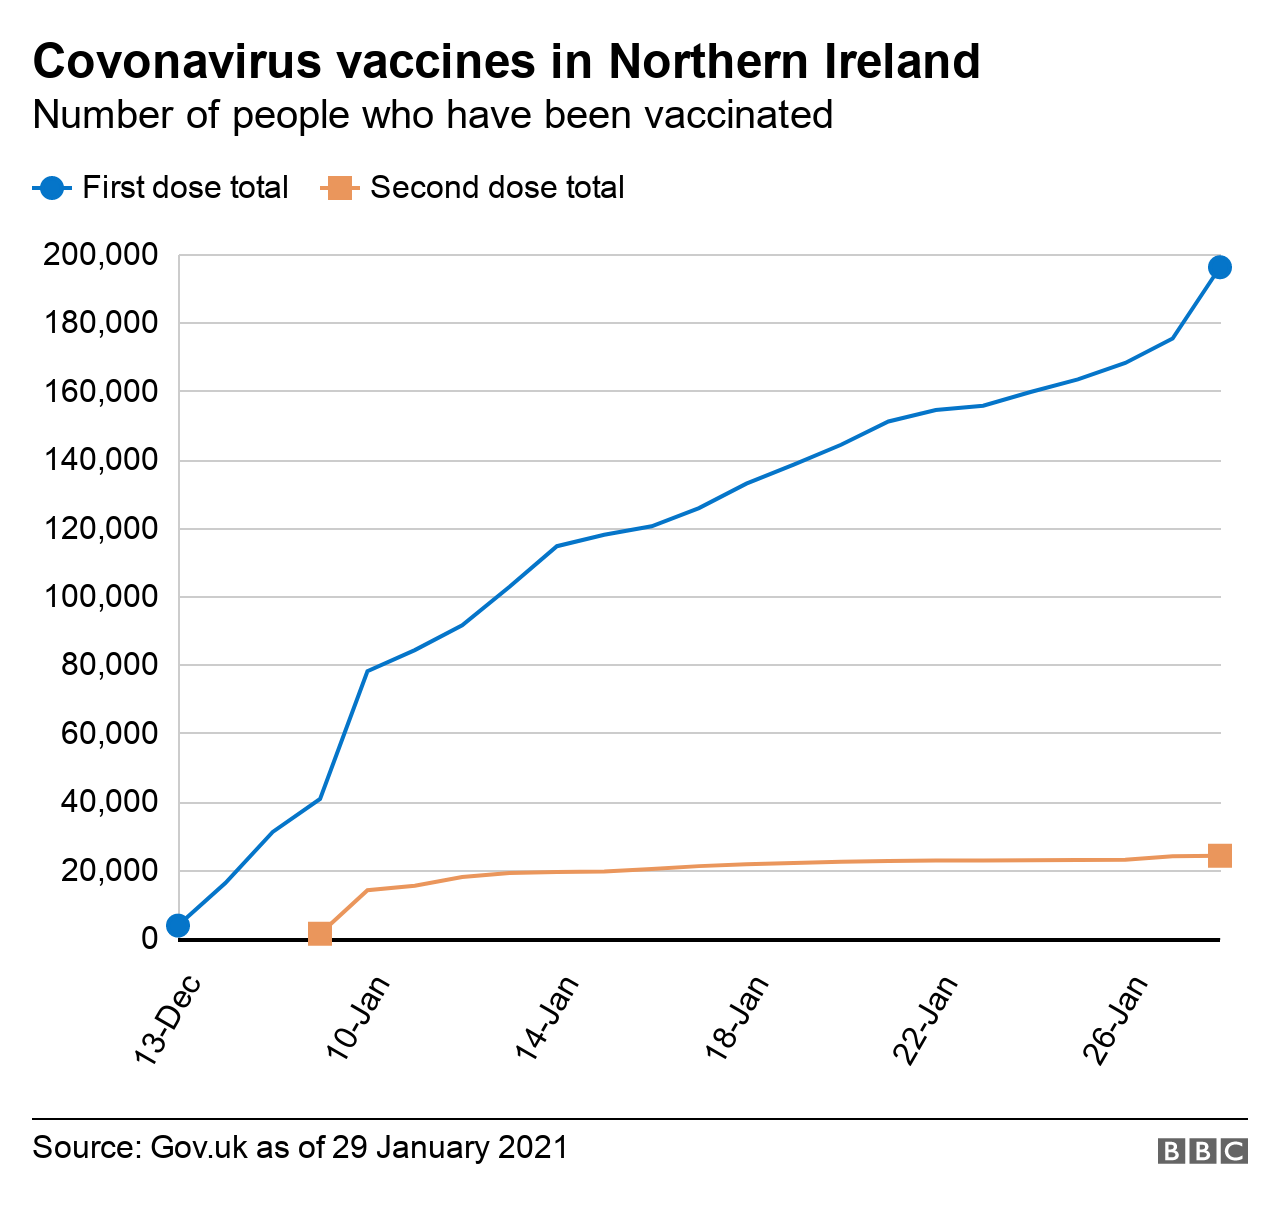 Number of people vaccinated in Northern Ireland